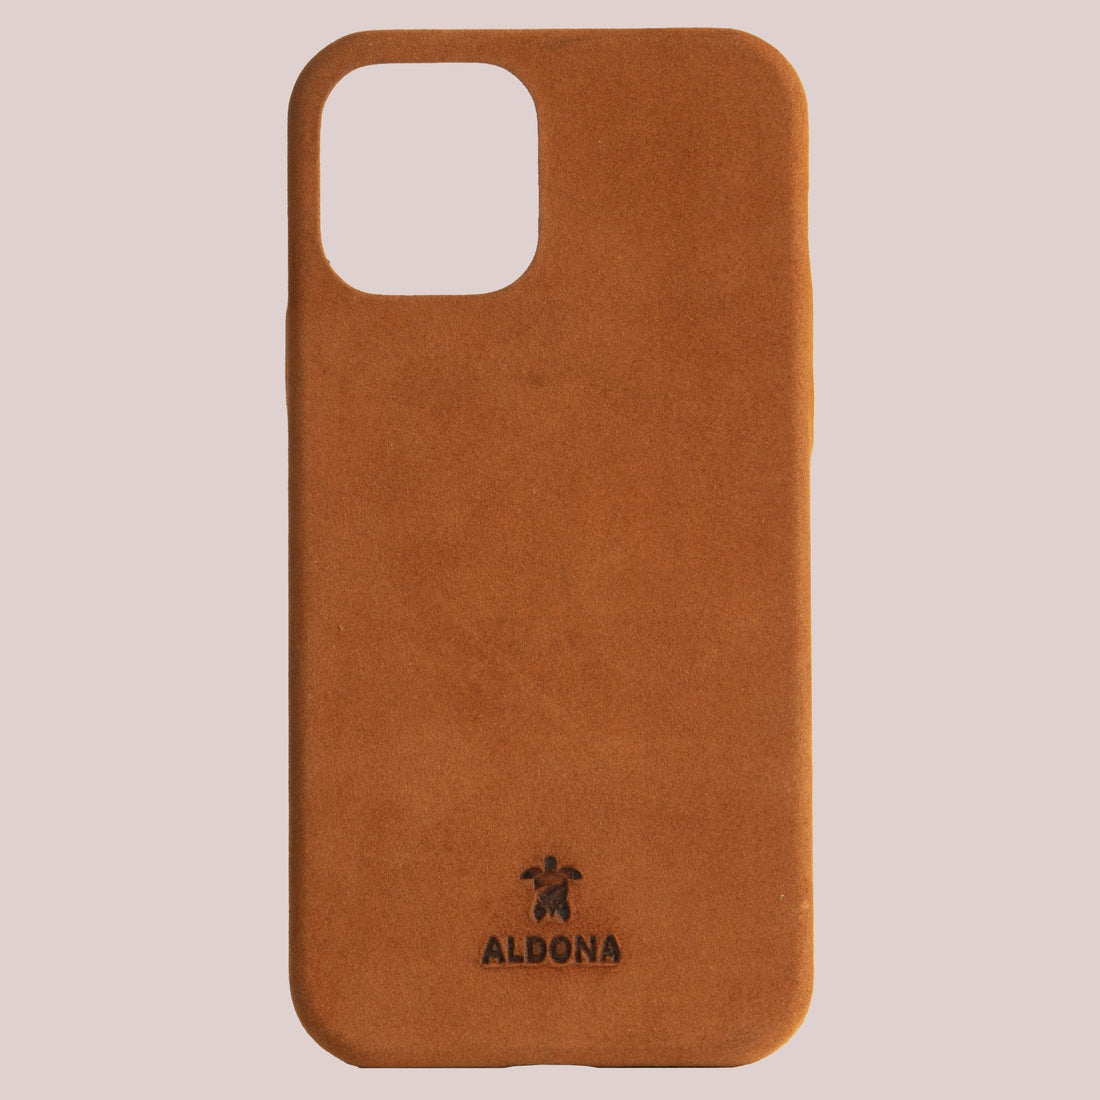 Kalon Case for iPhone 12 with MagSafe Compatibility - Cognac